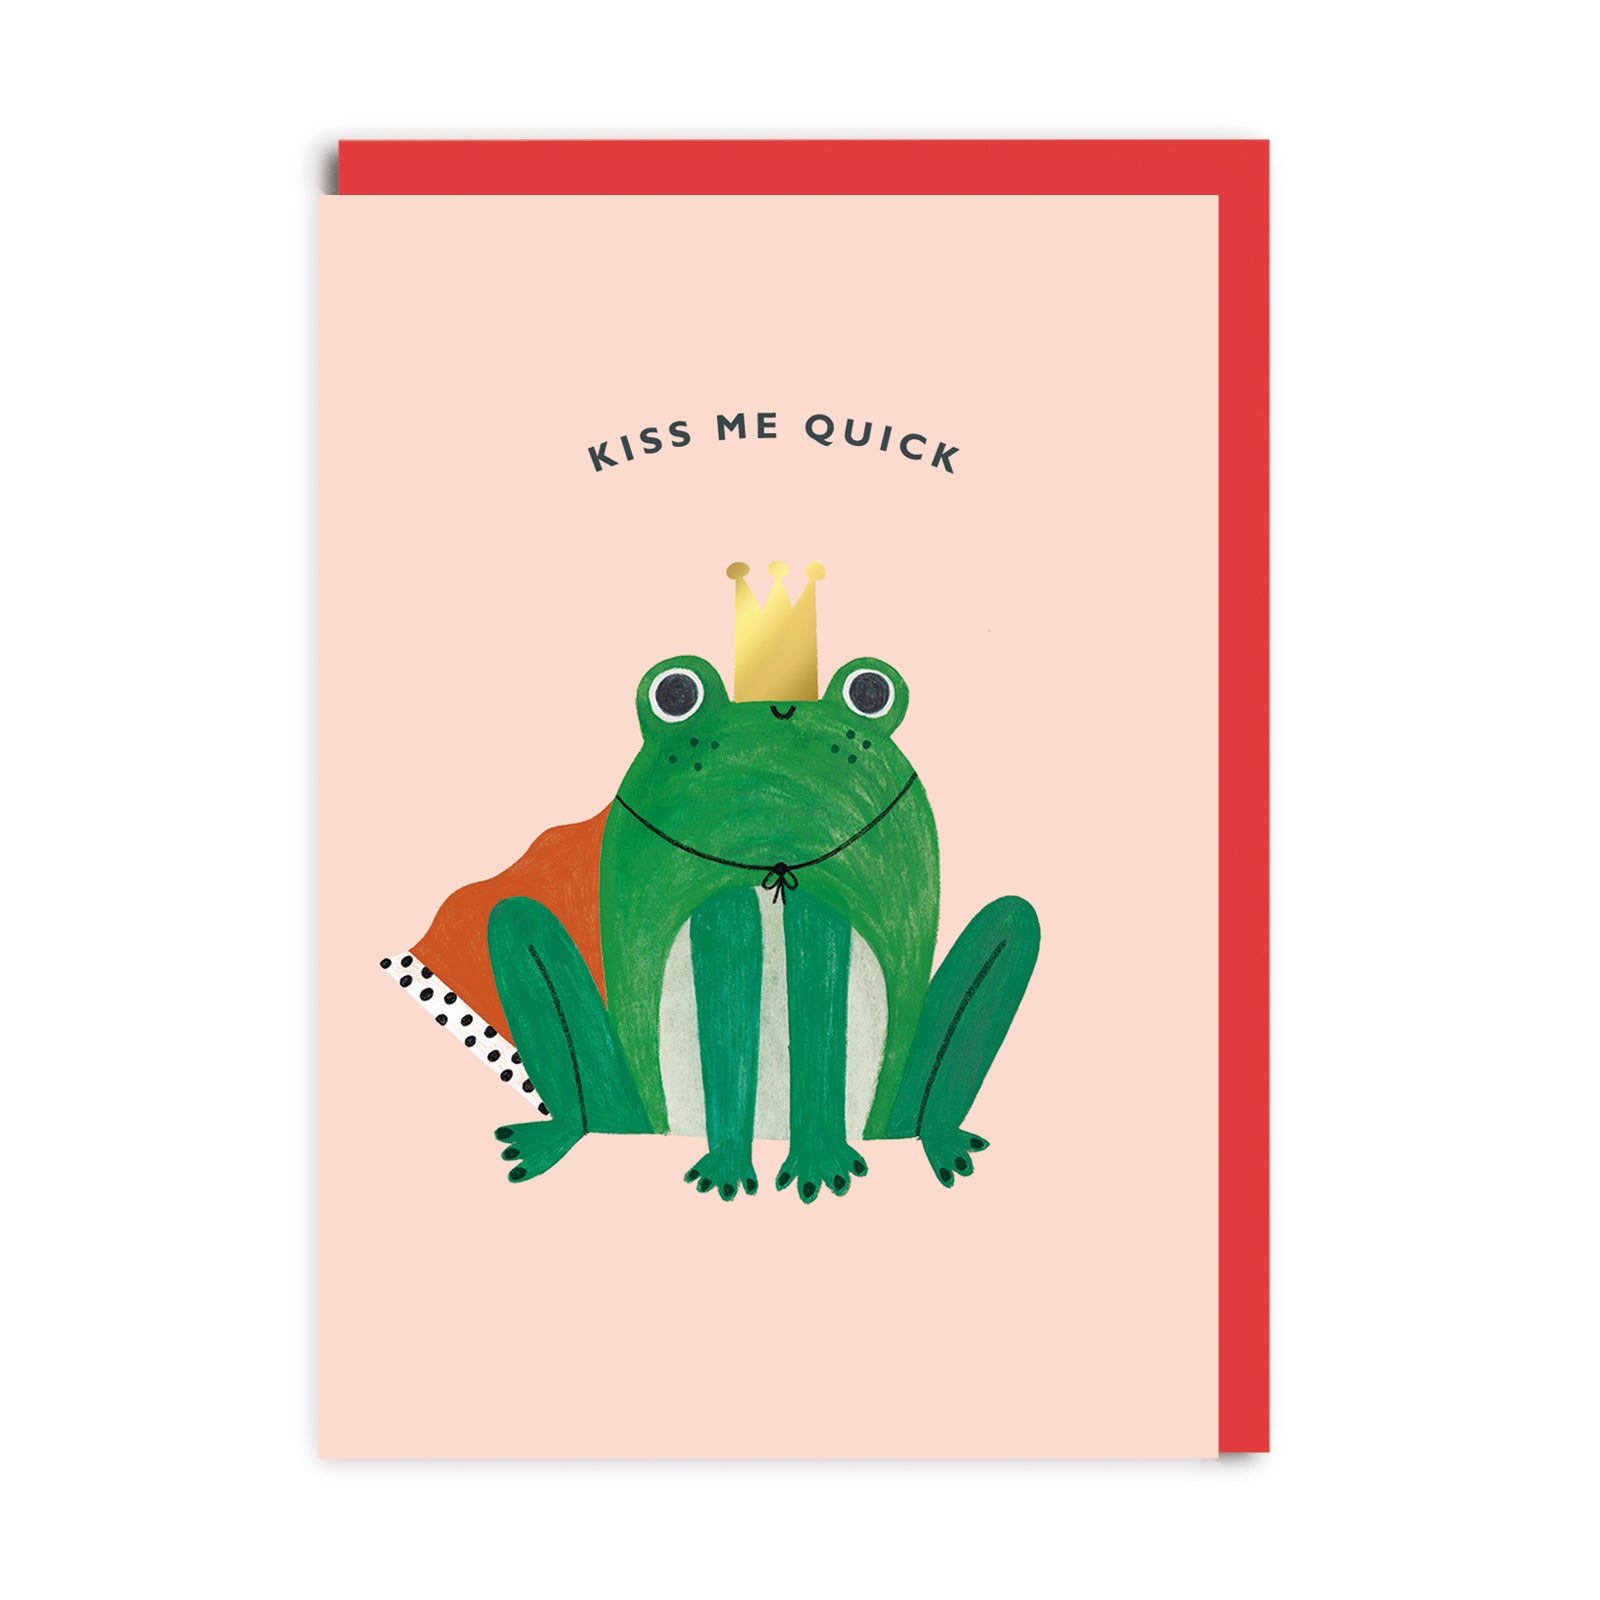 Valentine’s Day | Valentines Card For Him or Her | Kiss Me Quick Greeting Card | Ohh Deer Unique Valentine’s Card | Made In The UK, Eco-Friendly Materials, Plastic Free Packaging, A6